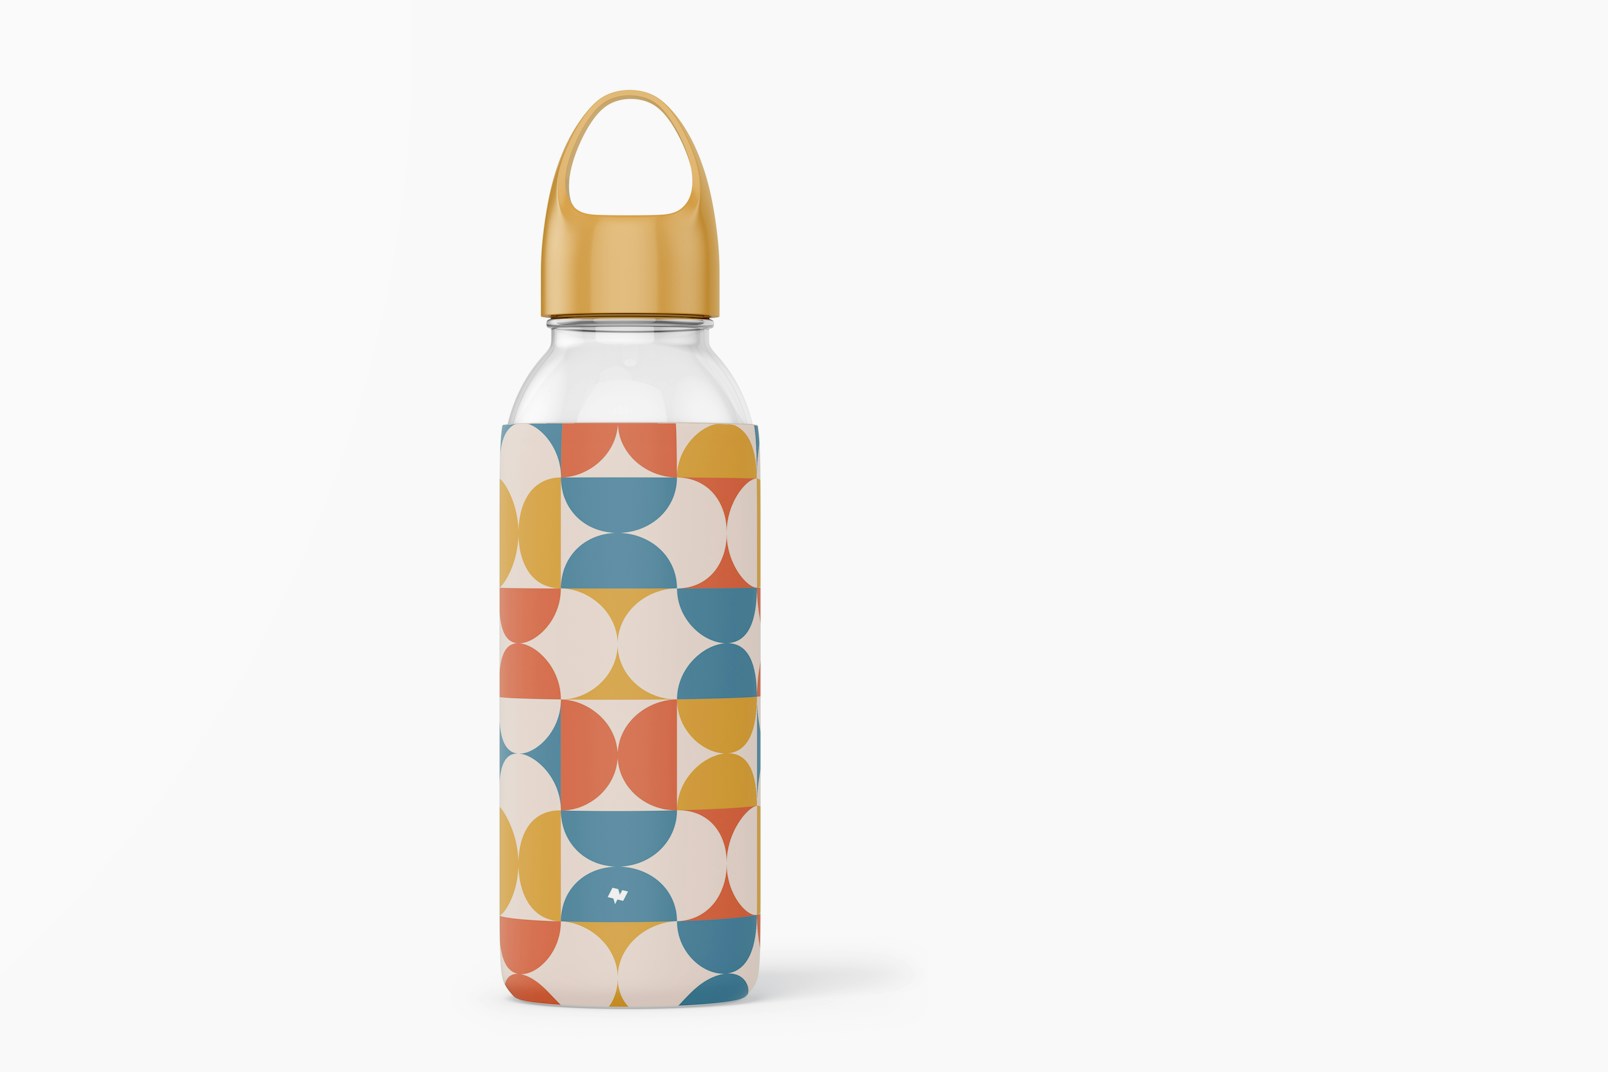 Water Bottle with Silicone Sleeve Mockup